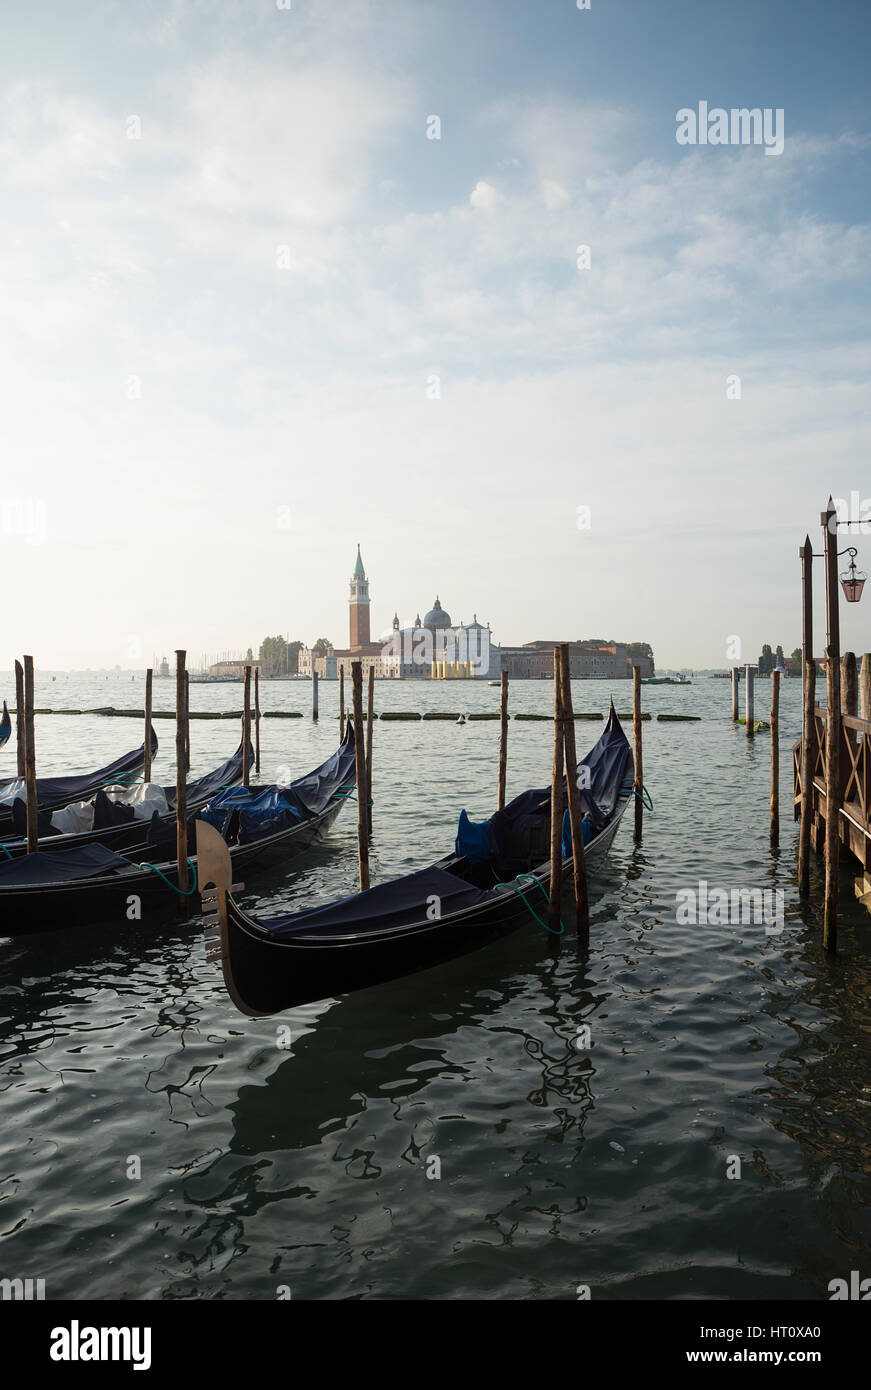 San giorgio maggiore at stock hi-res Alamy images photography and - dusk